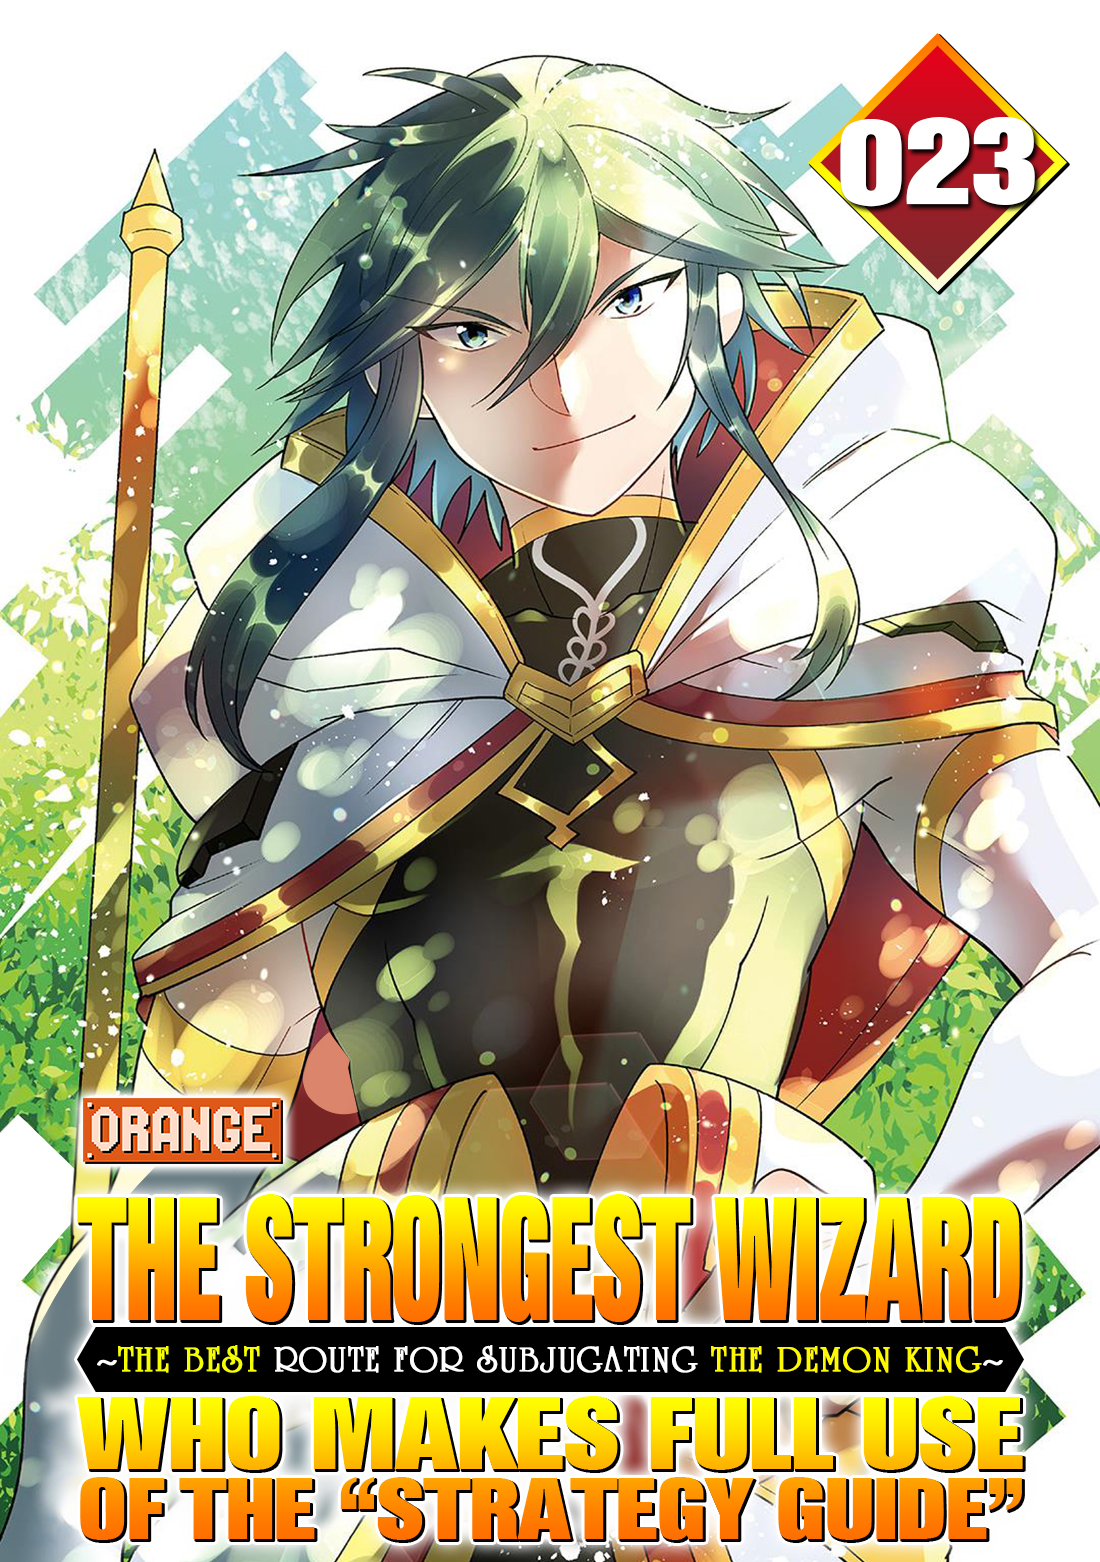 THE STRONGEST WIZARD EP023 00